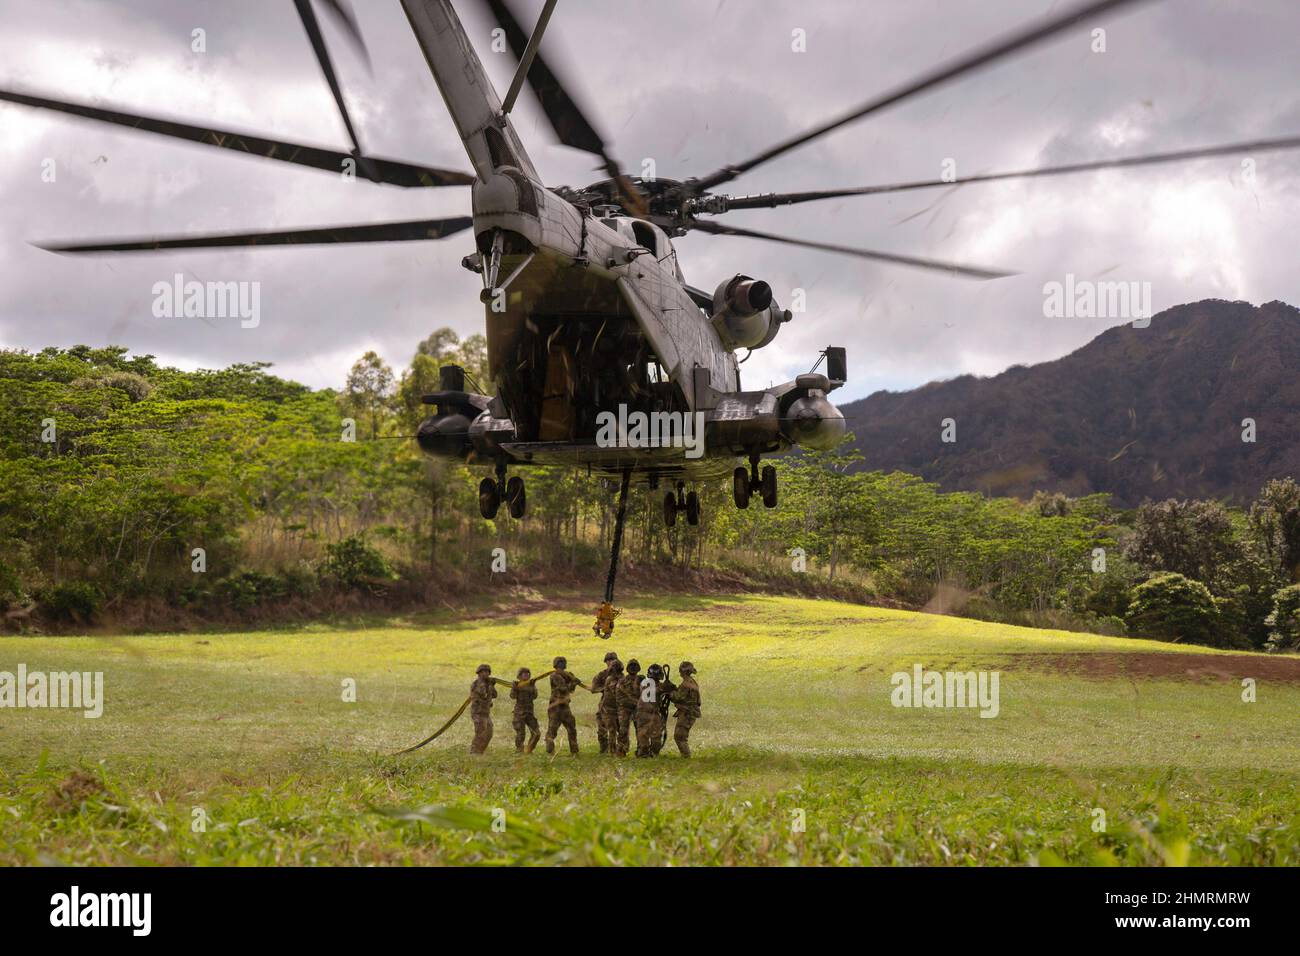 Hawaii, USA. 27th Jan, 2022. A U.S. Marine CH-53E Super Stallion helicopter assigned to Marine Heavy Helicopter Squadron (HMH) 463, performs a slingload of an Army H-60 helicopter at U.S. Army Schofield Barracks, Hawaii, Jan. 27, 2022. HMH-463 provided aircraft support to the Army's 25th Infantry Division's Downed Aircraft Recovery Team (DART), this training provided both the Marines of HMH-463 and 25th ID DART the oppertunity to learn from one another and develop their skills in real world applications. Credit: U.S. Marines/ZUMA Press Wire Service/ZUMAPRESS.com/Alamy Live News Stock Photo